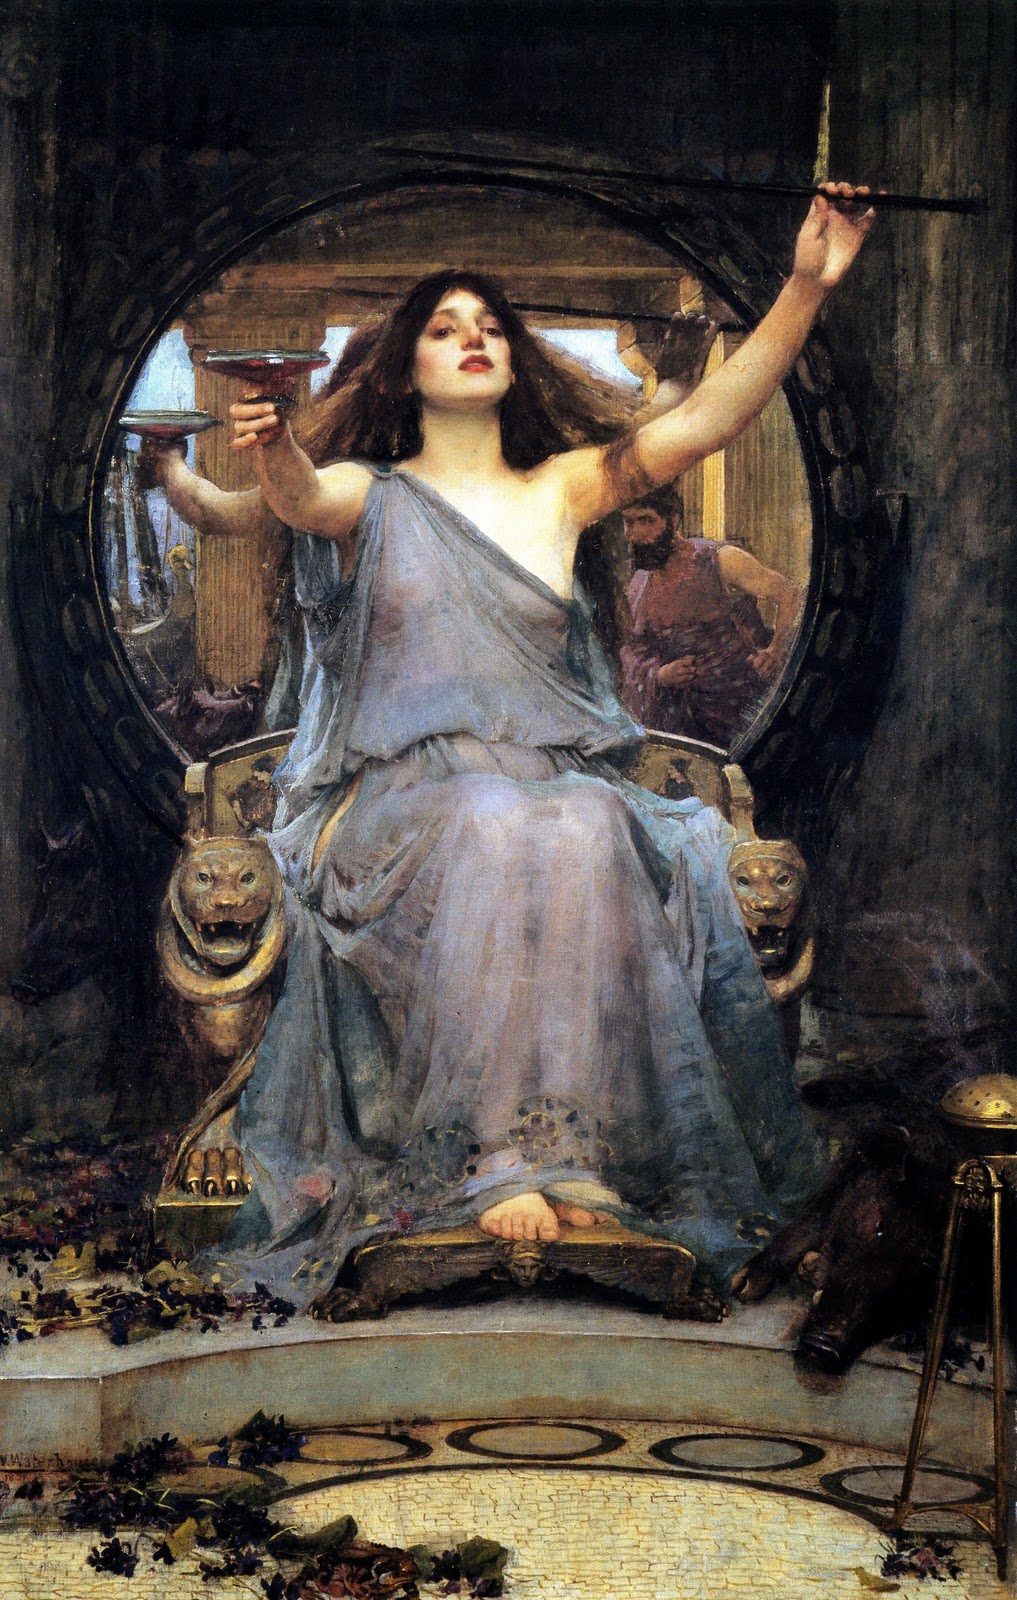 Sun Ra song "Circe" from When Sun Comes Out: Circe Offering the Cup to Odysseus by John William Waterhouse